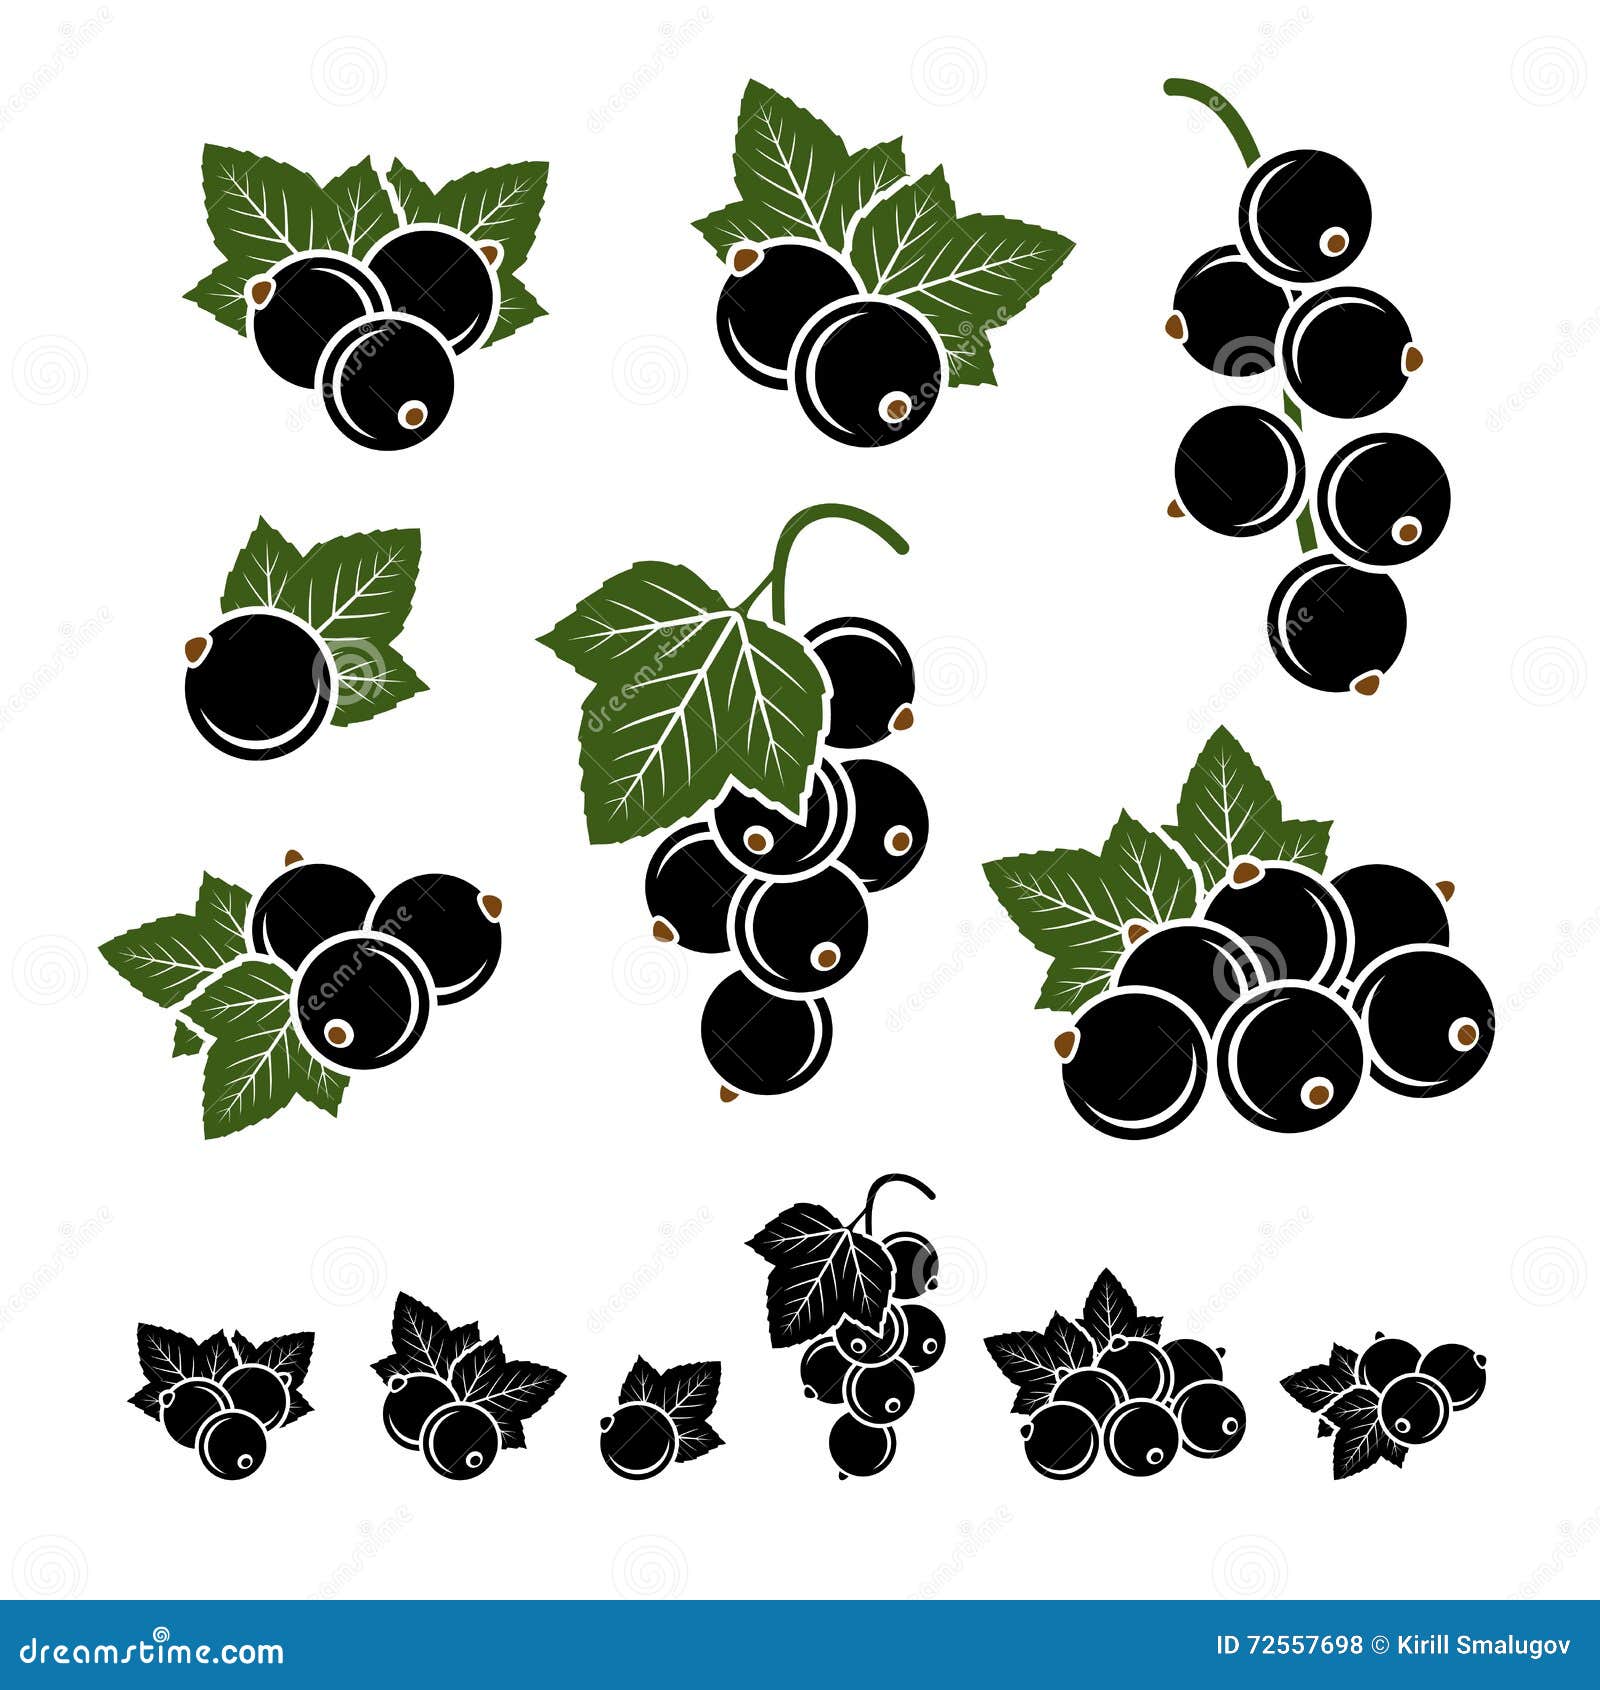 Botanical illustration of black currant hi-res stock photography and images  - Page 2 - Alamy